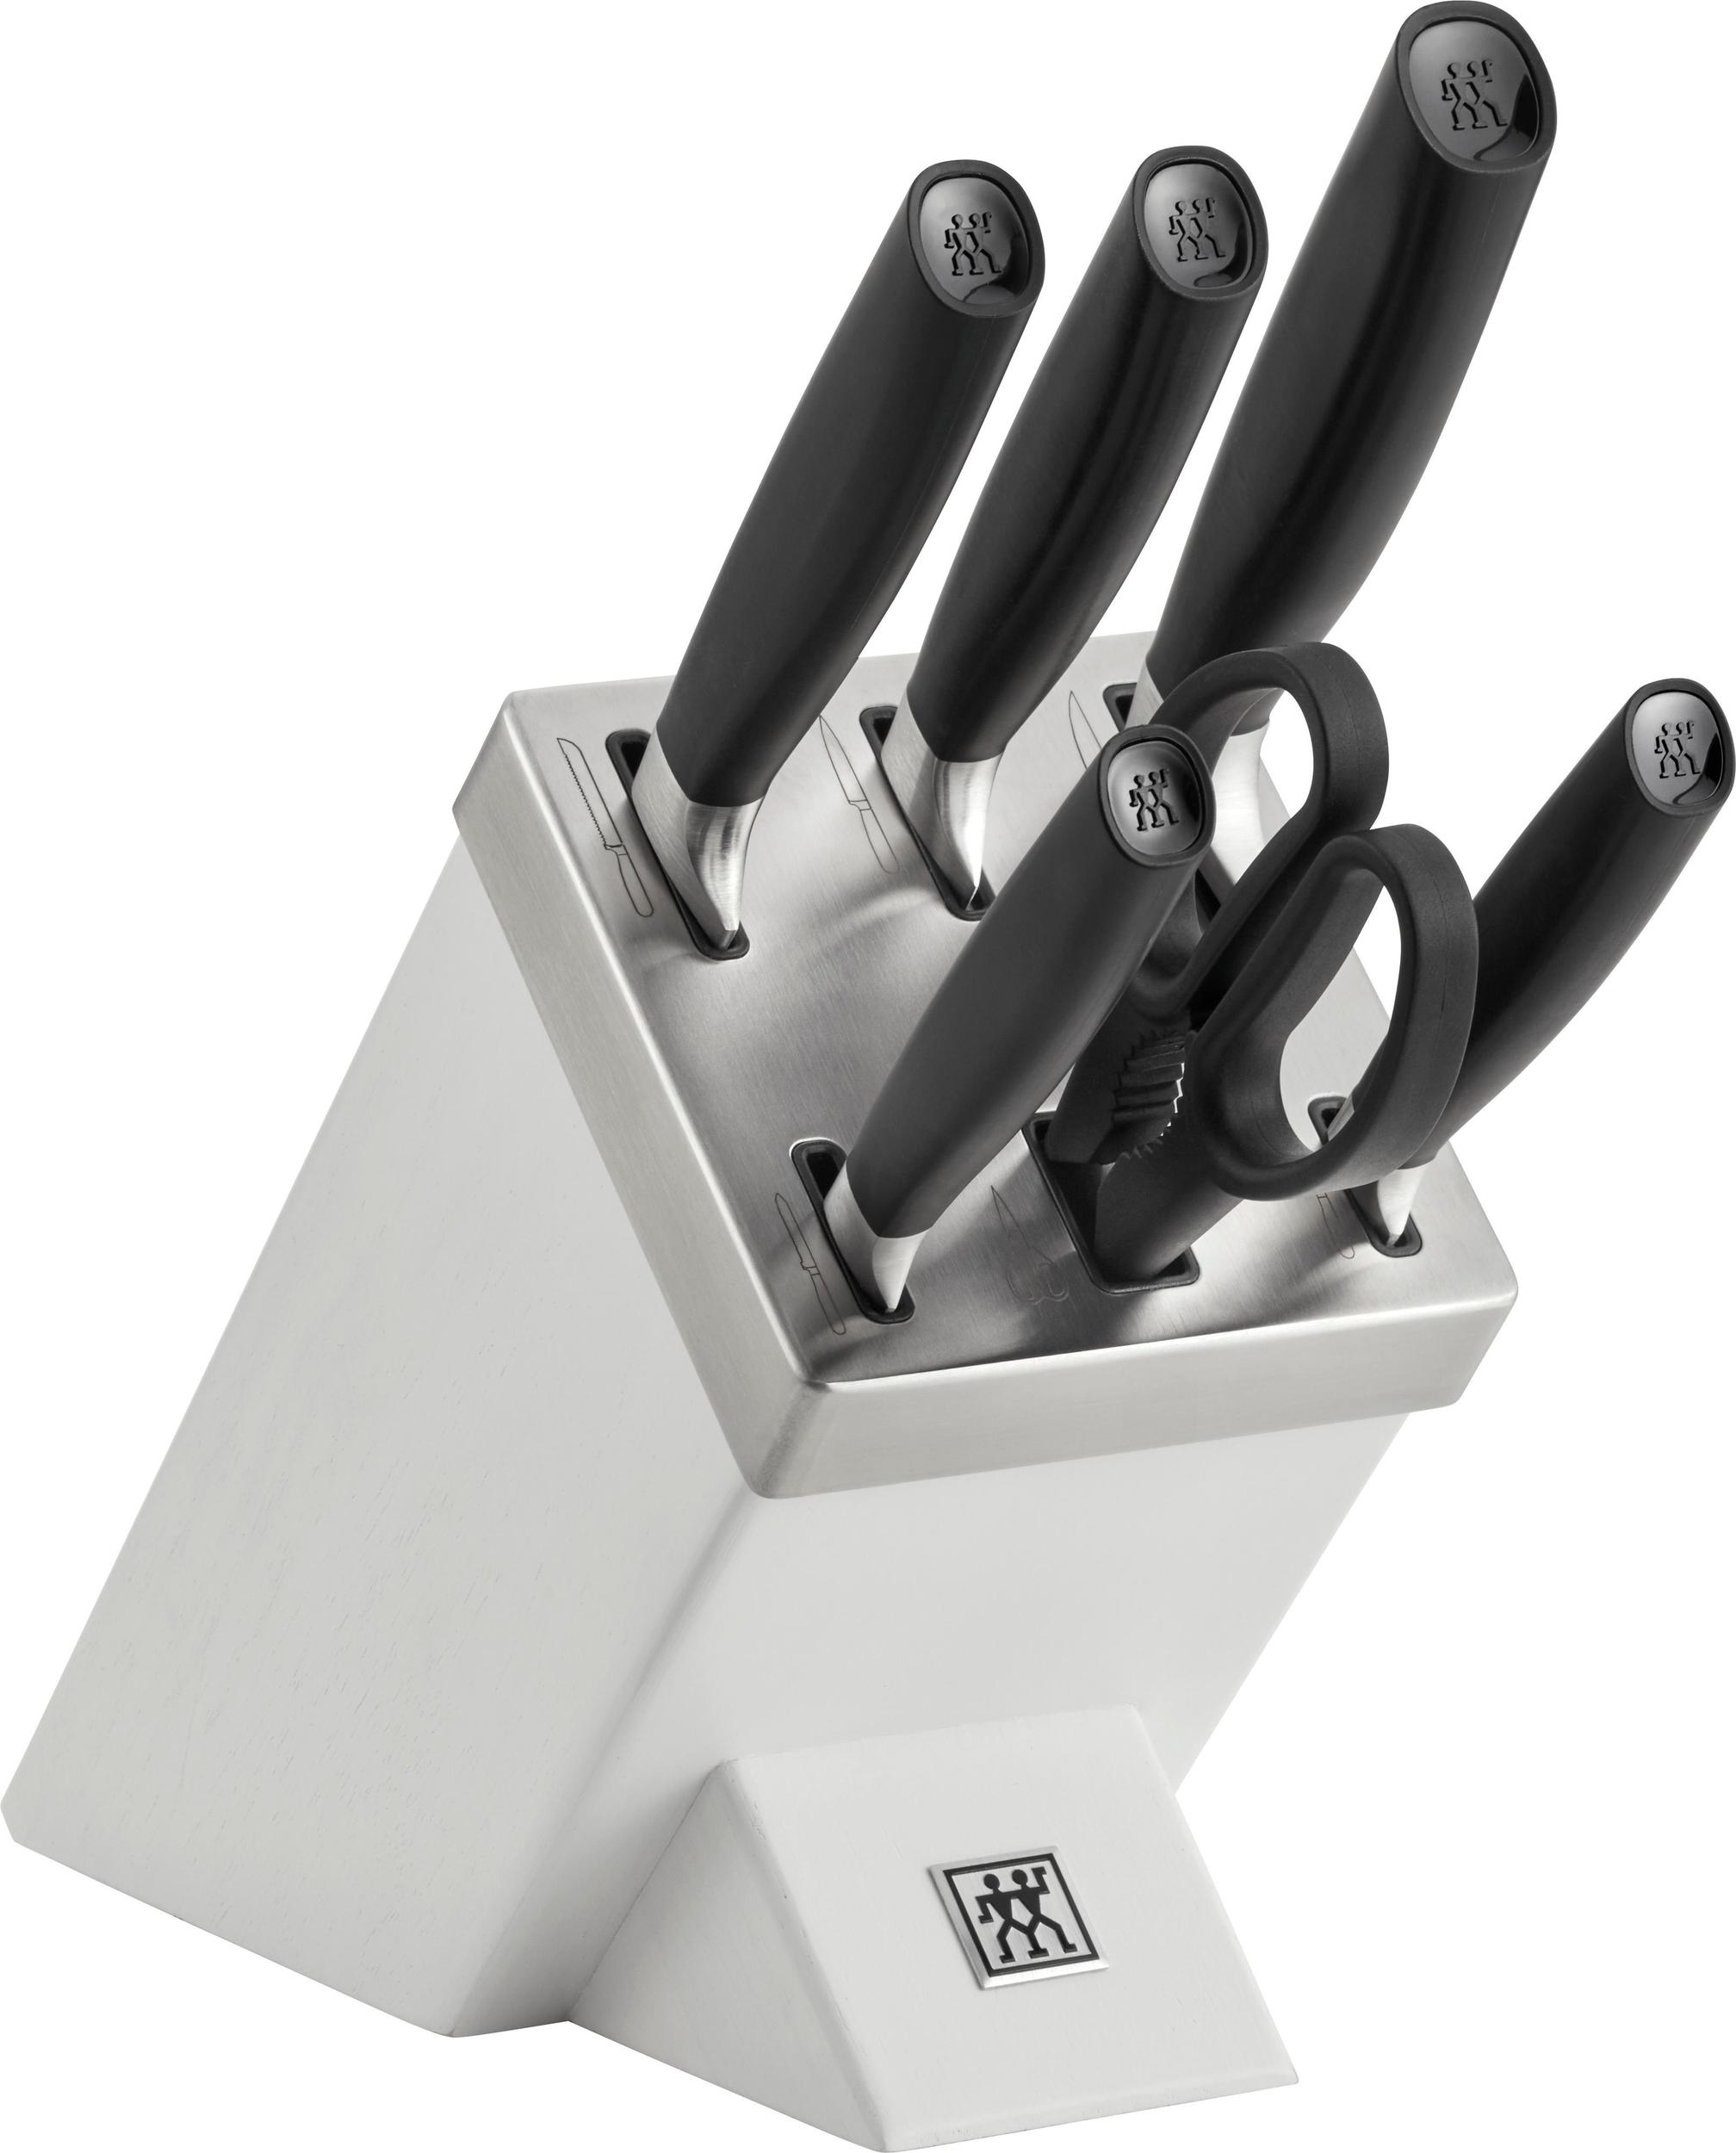 https://3fa-media.com/zwilling/zwilling-all-star-self-sharpening-block-with-5-knives-and-scissors-white-block__129688_c4dc7f5-s2500x2500.jpg